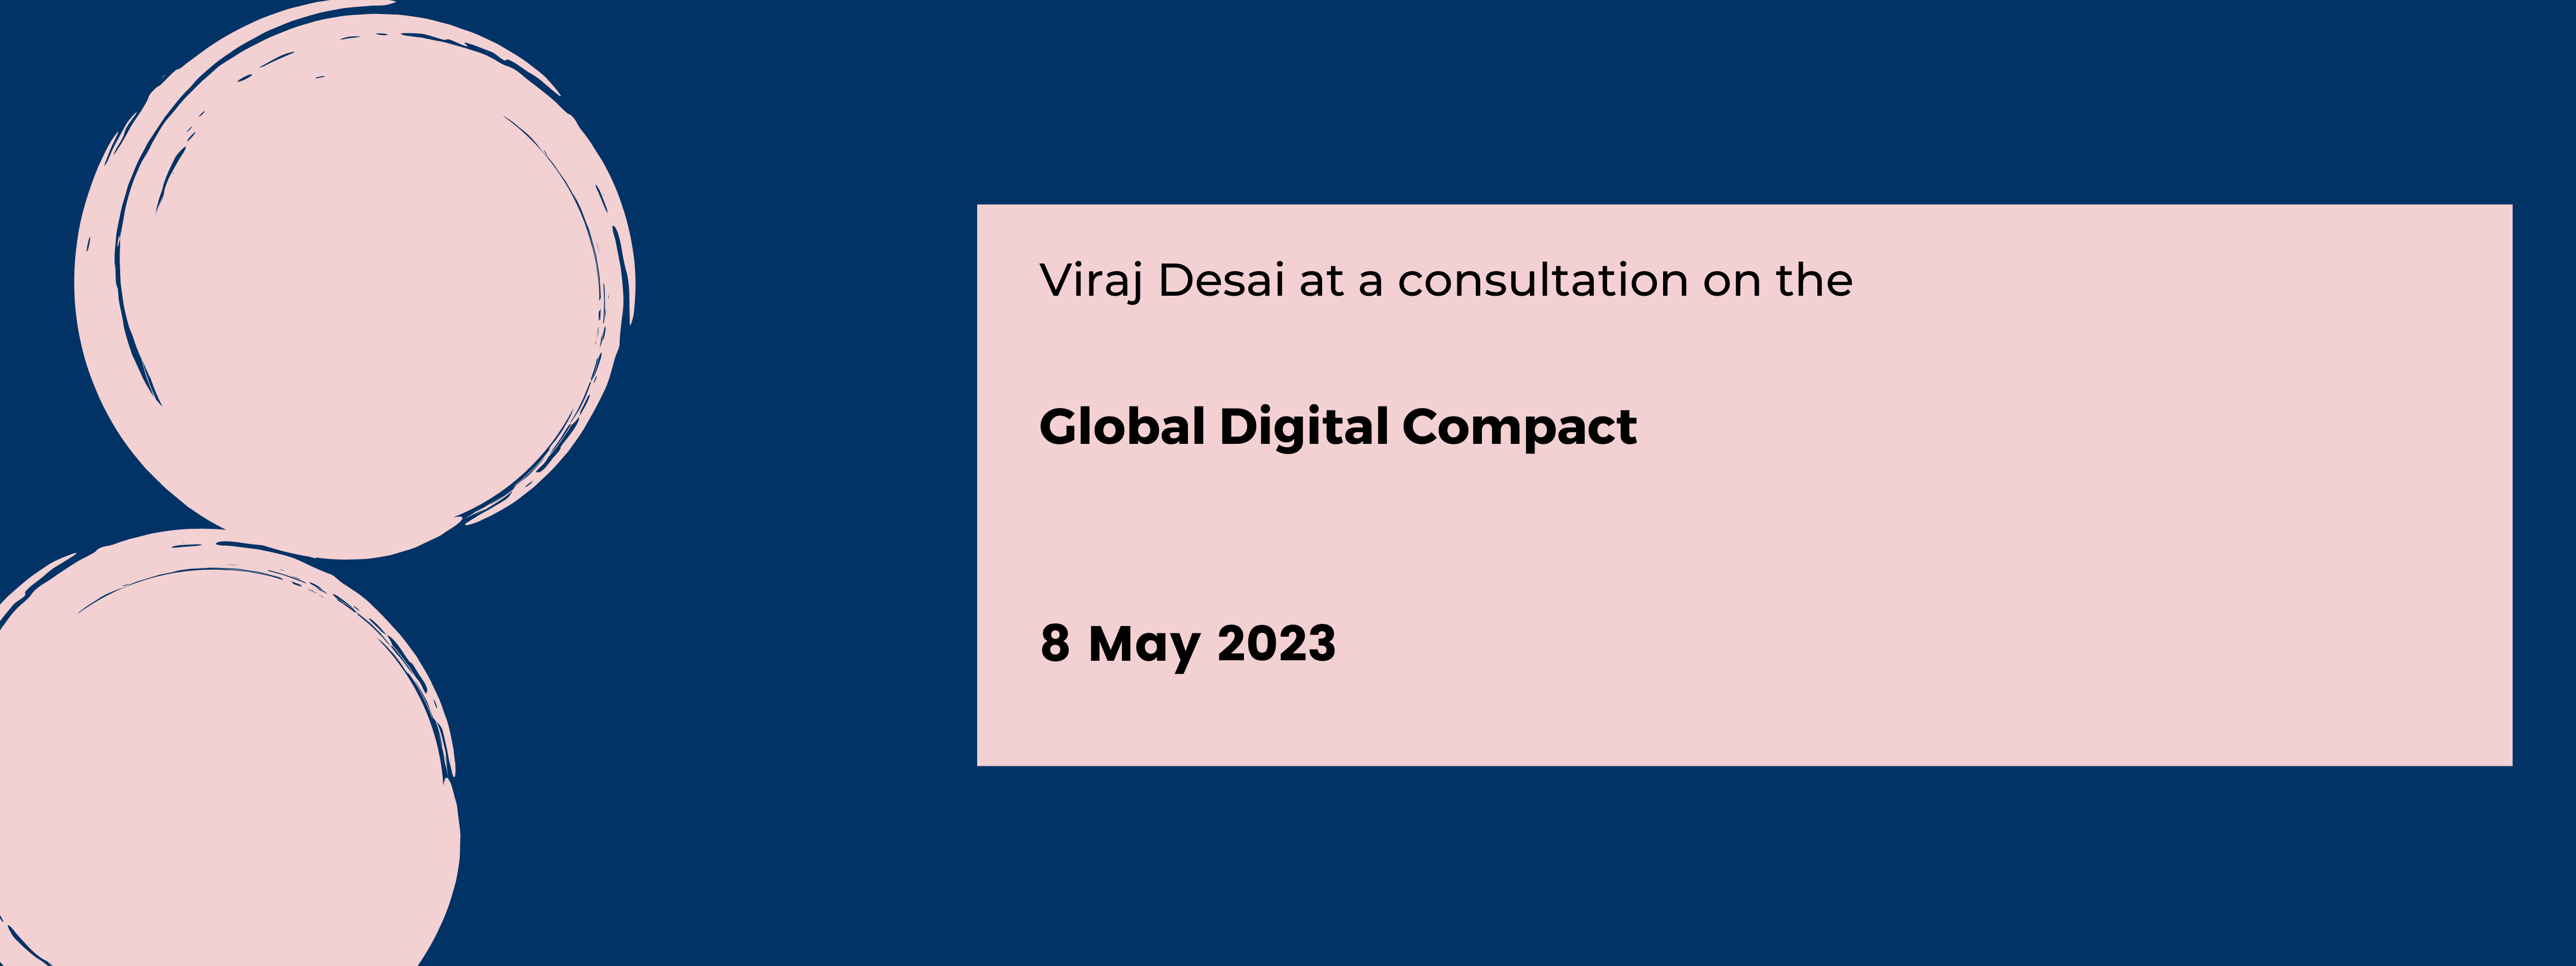 Consultation on the Global Digital Compact